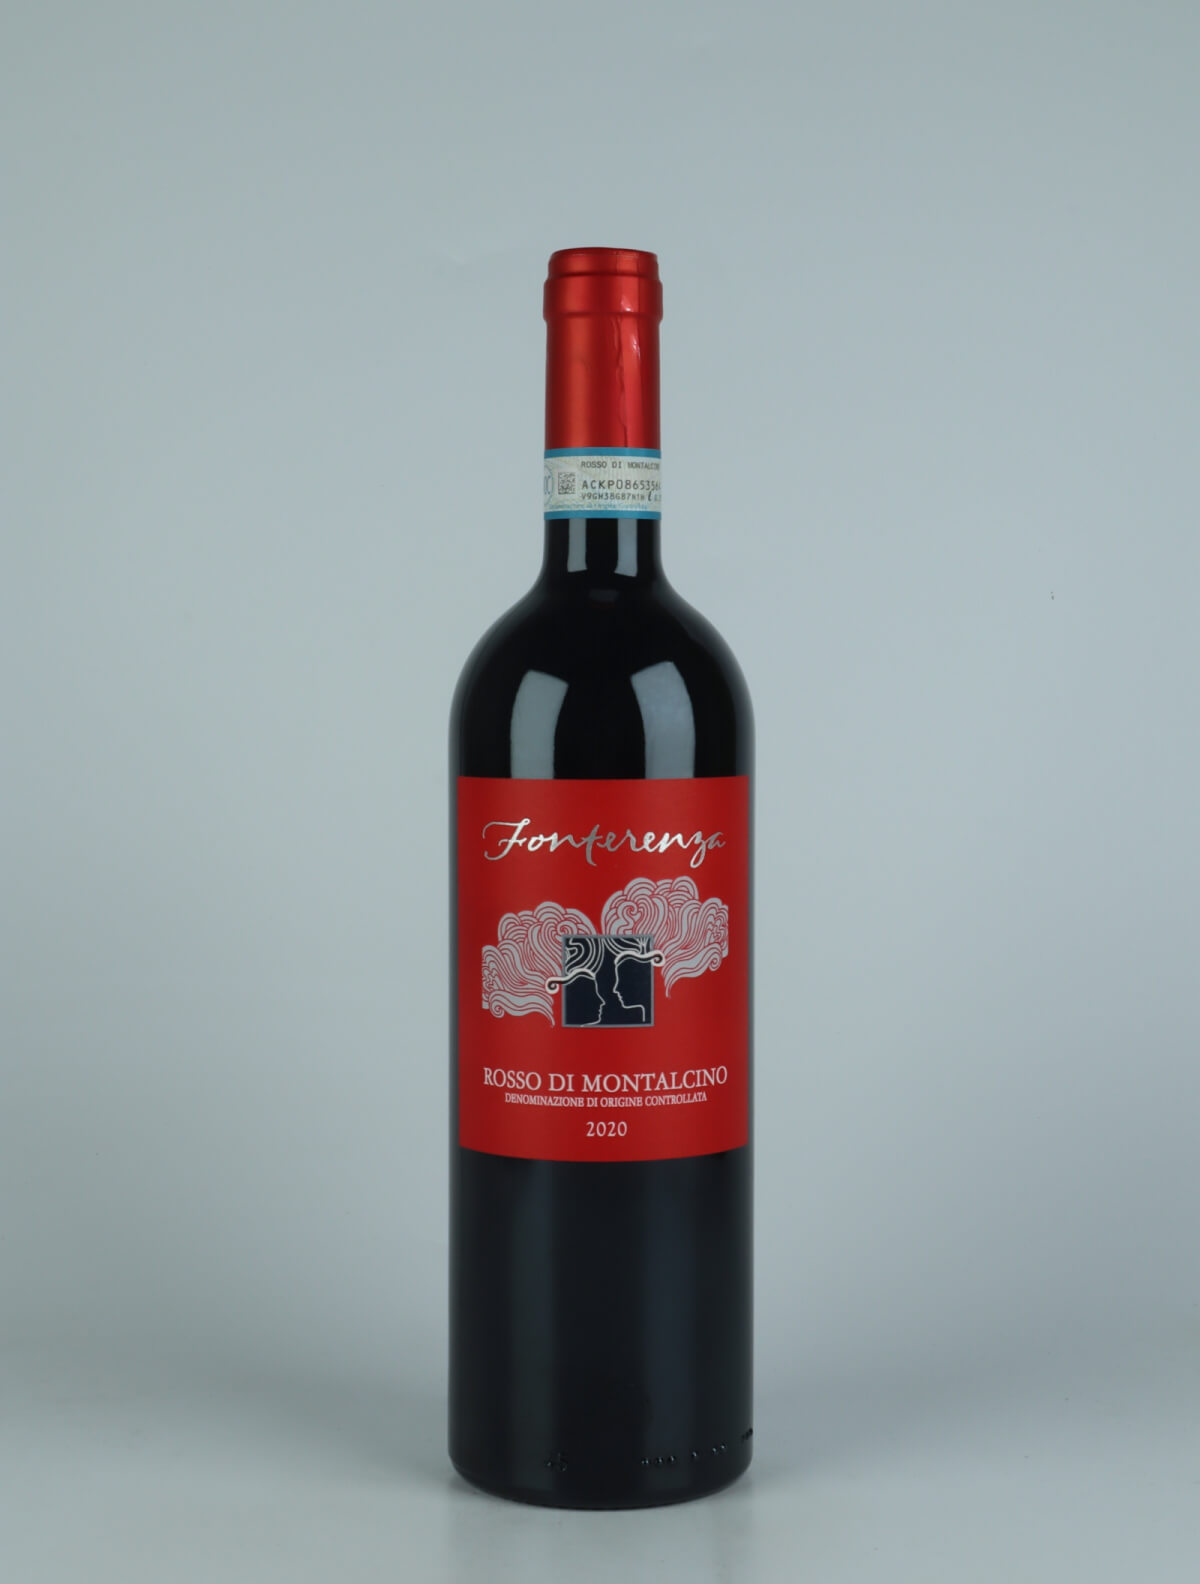 A bottle 2020 Rosso di Montalcino Red wine from Fonterenza, Tuscany in Italy